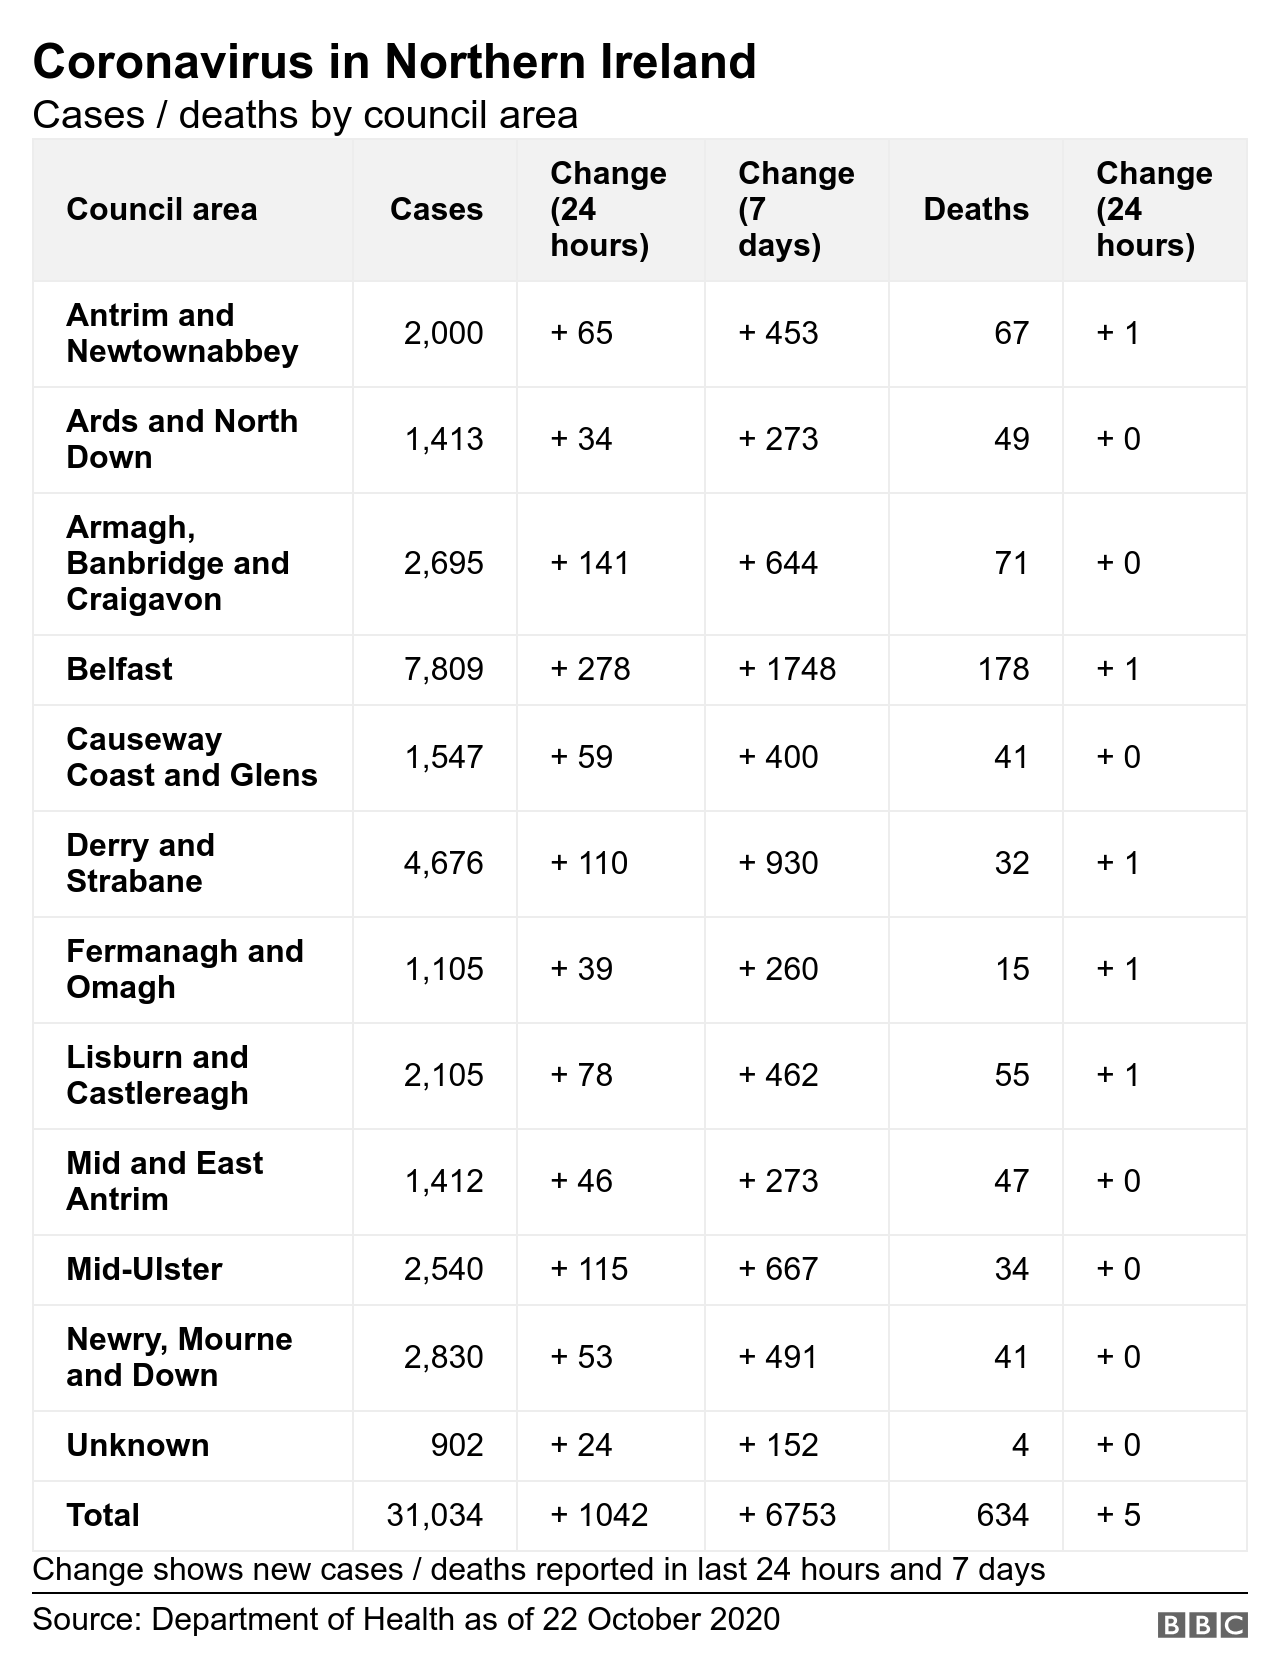 Geographic breakdown of NI Covid statistics on 22 October